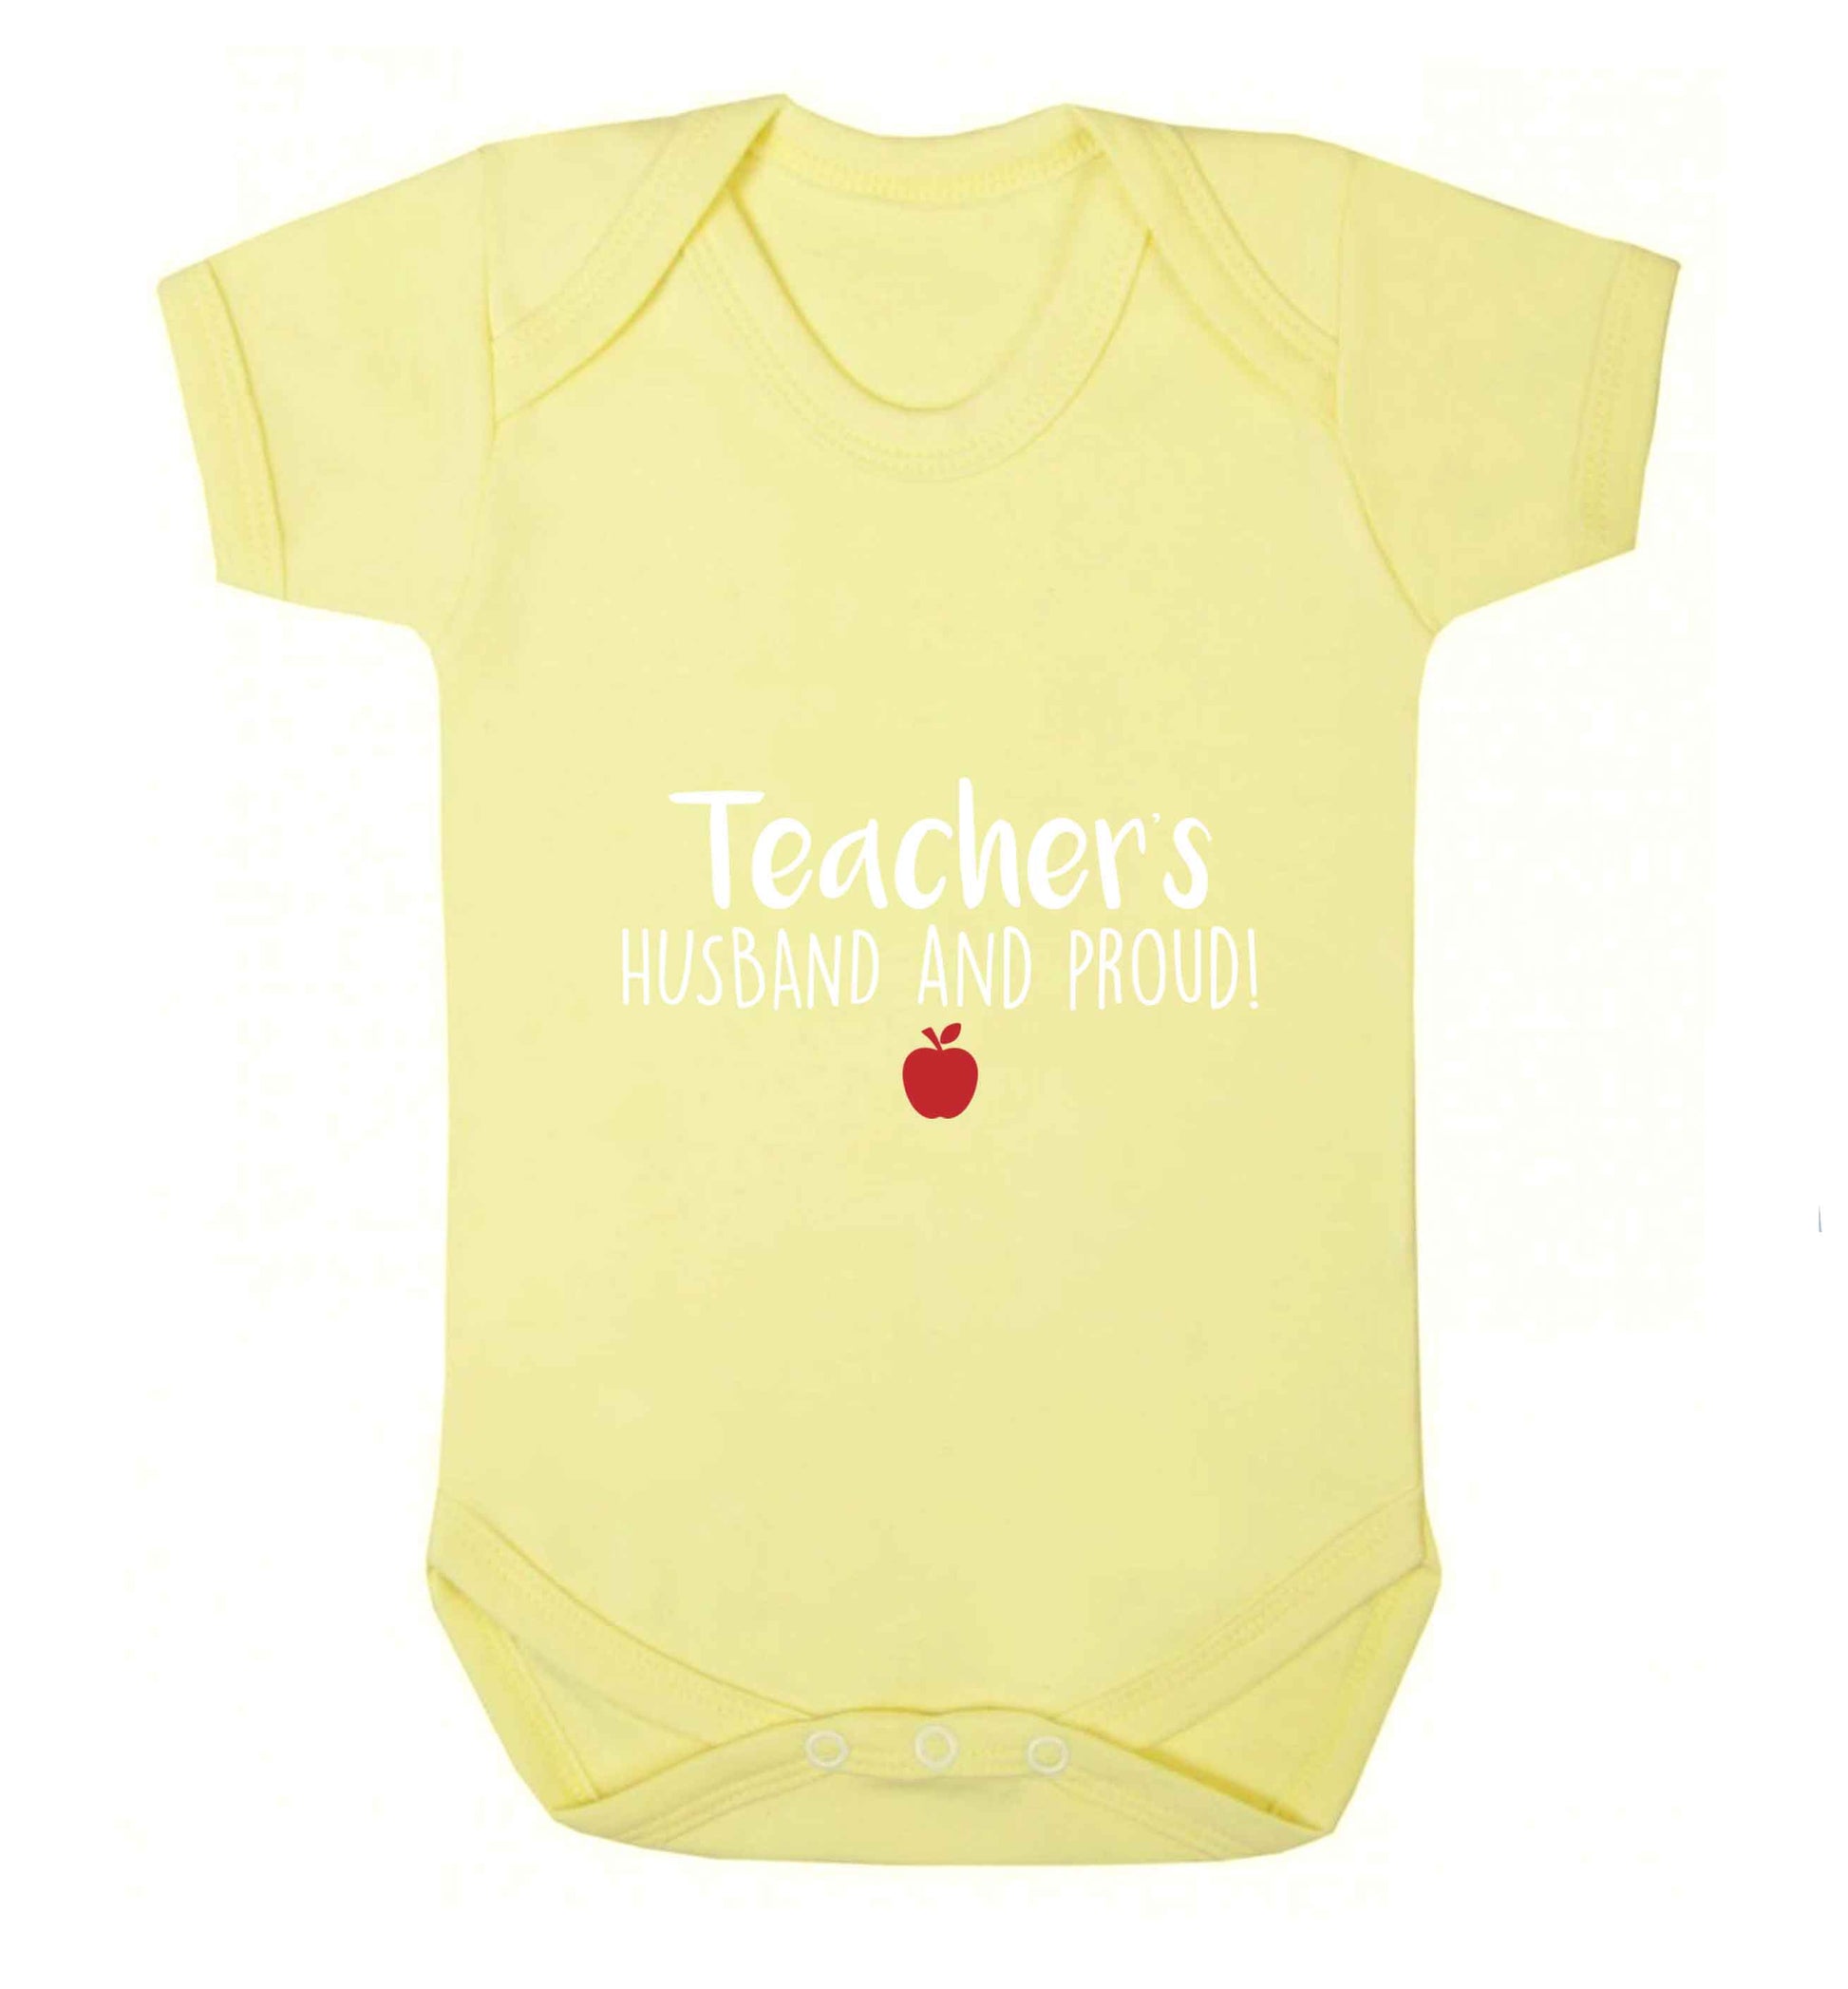 Teachers husband and proud baby vest pale yellow 18-24 months